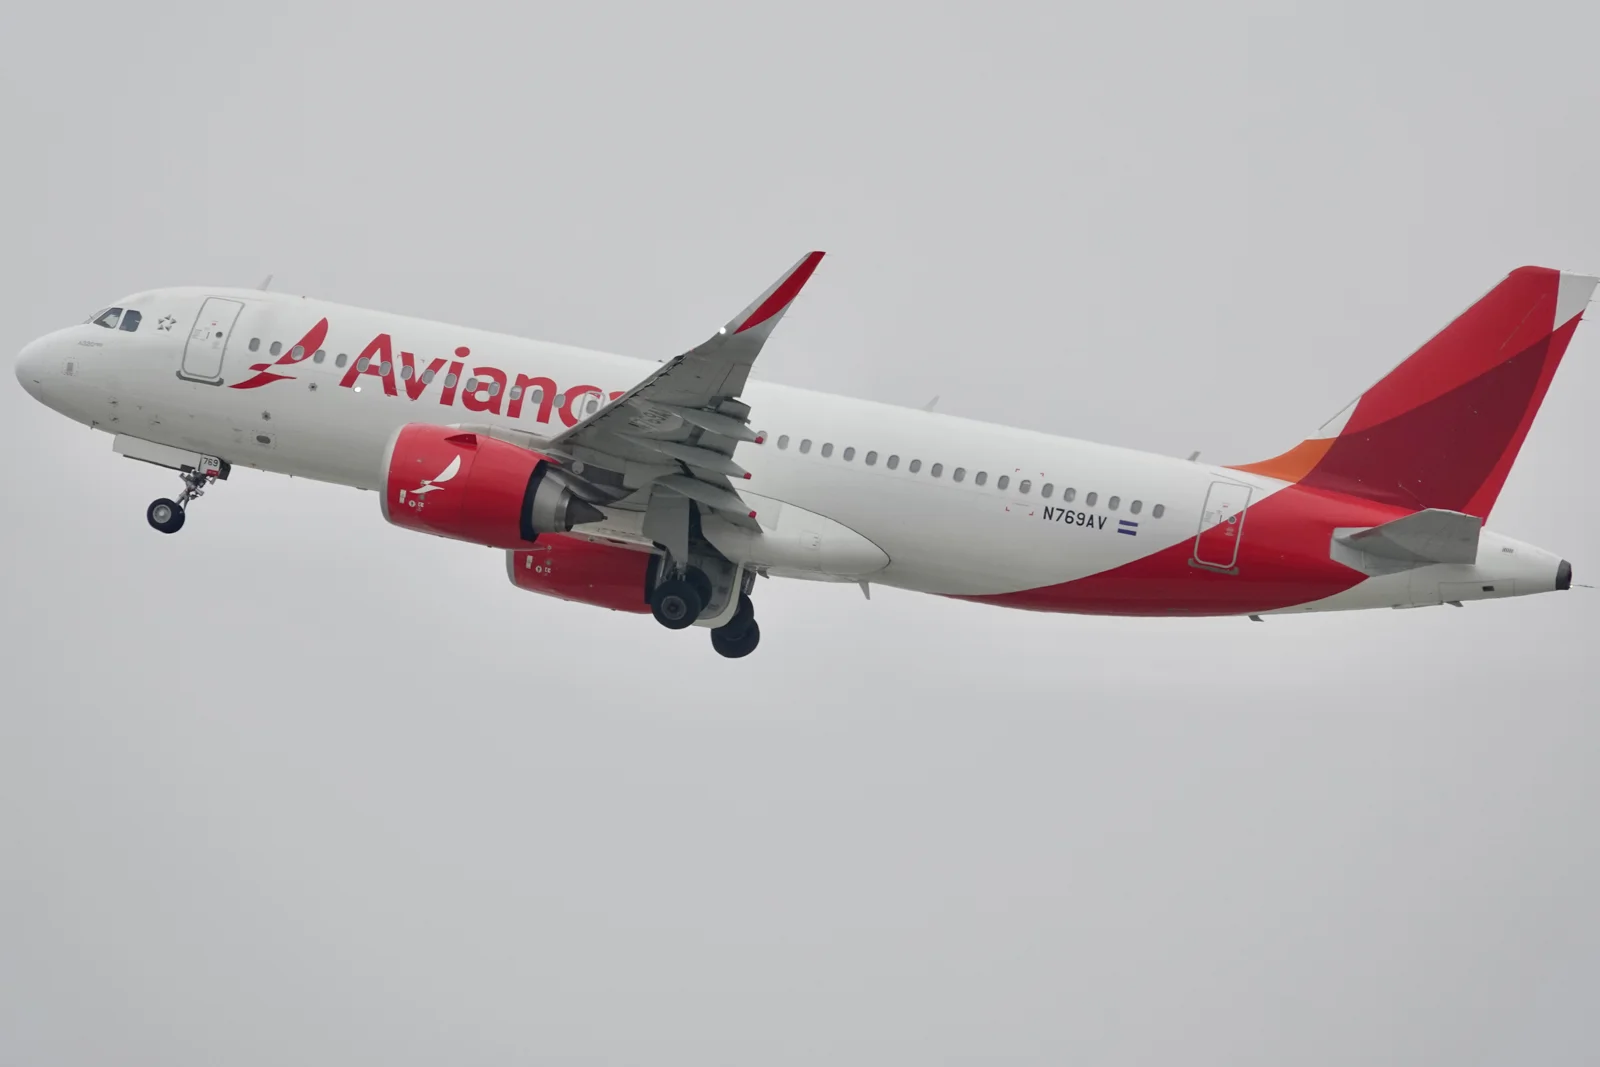 Why is Avianca so cheap?